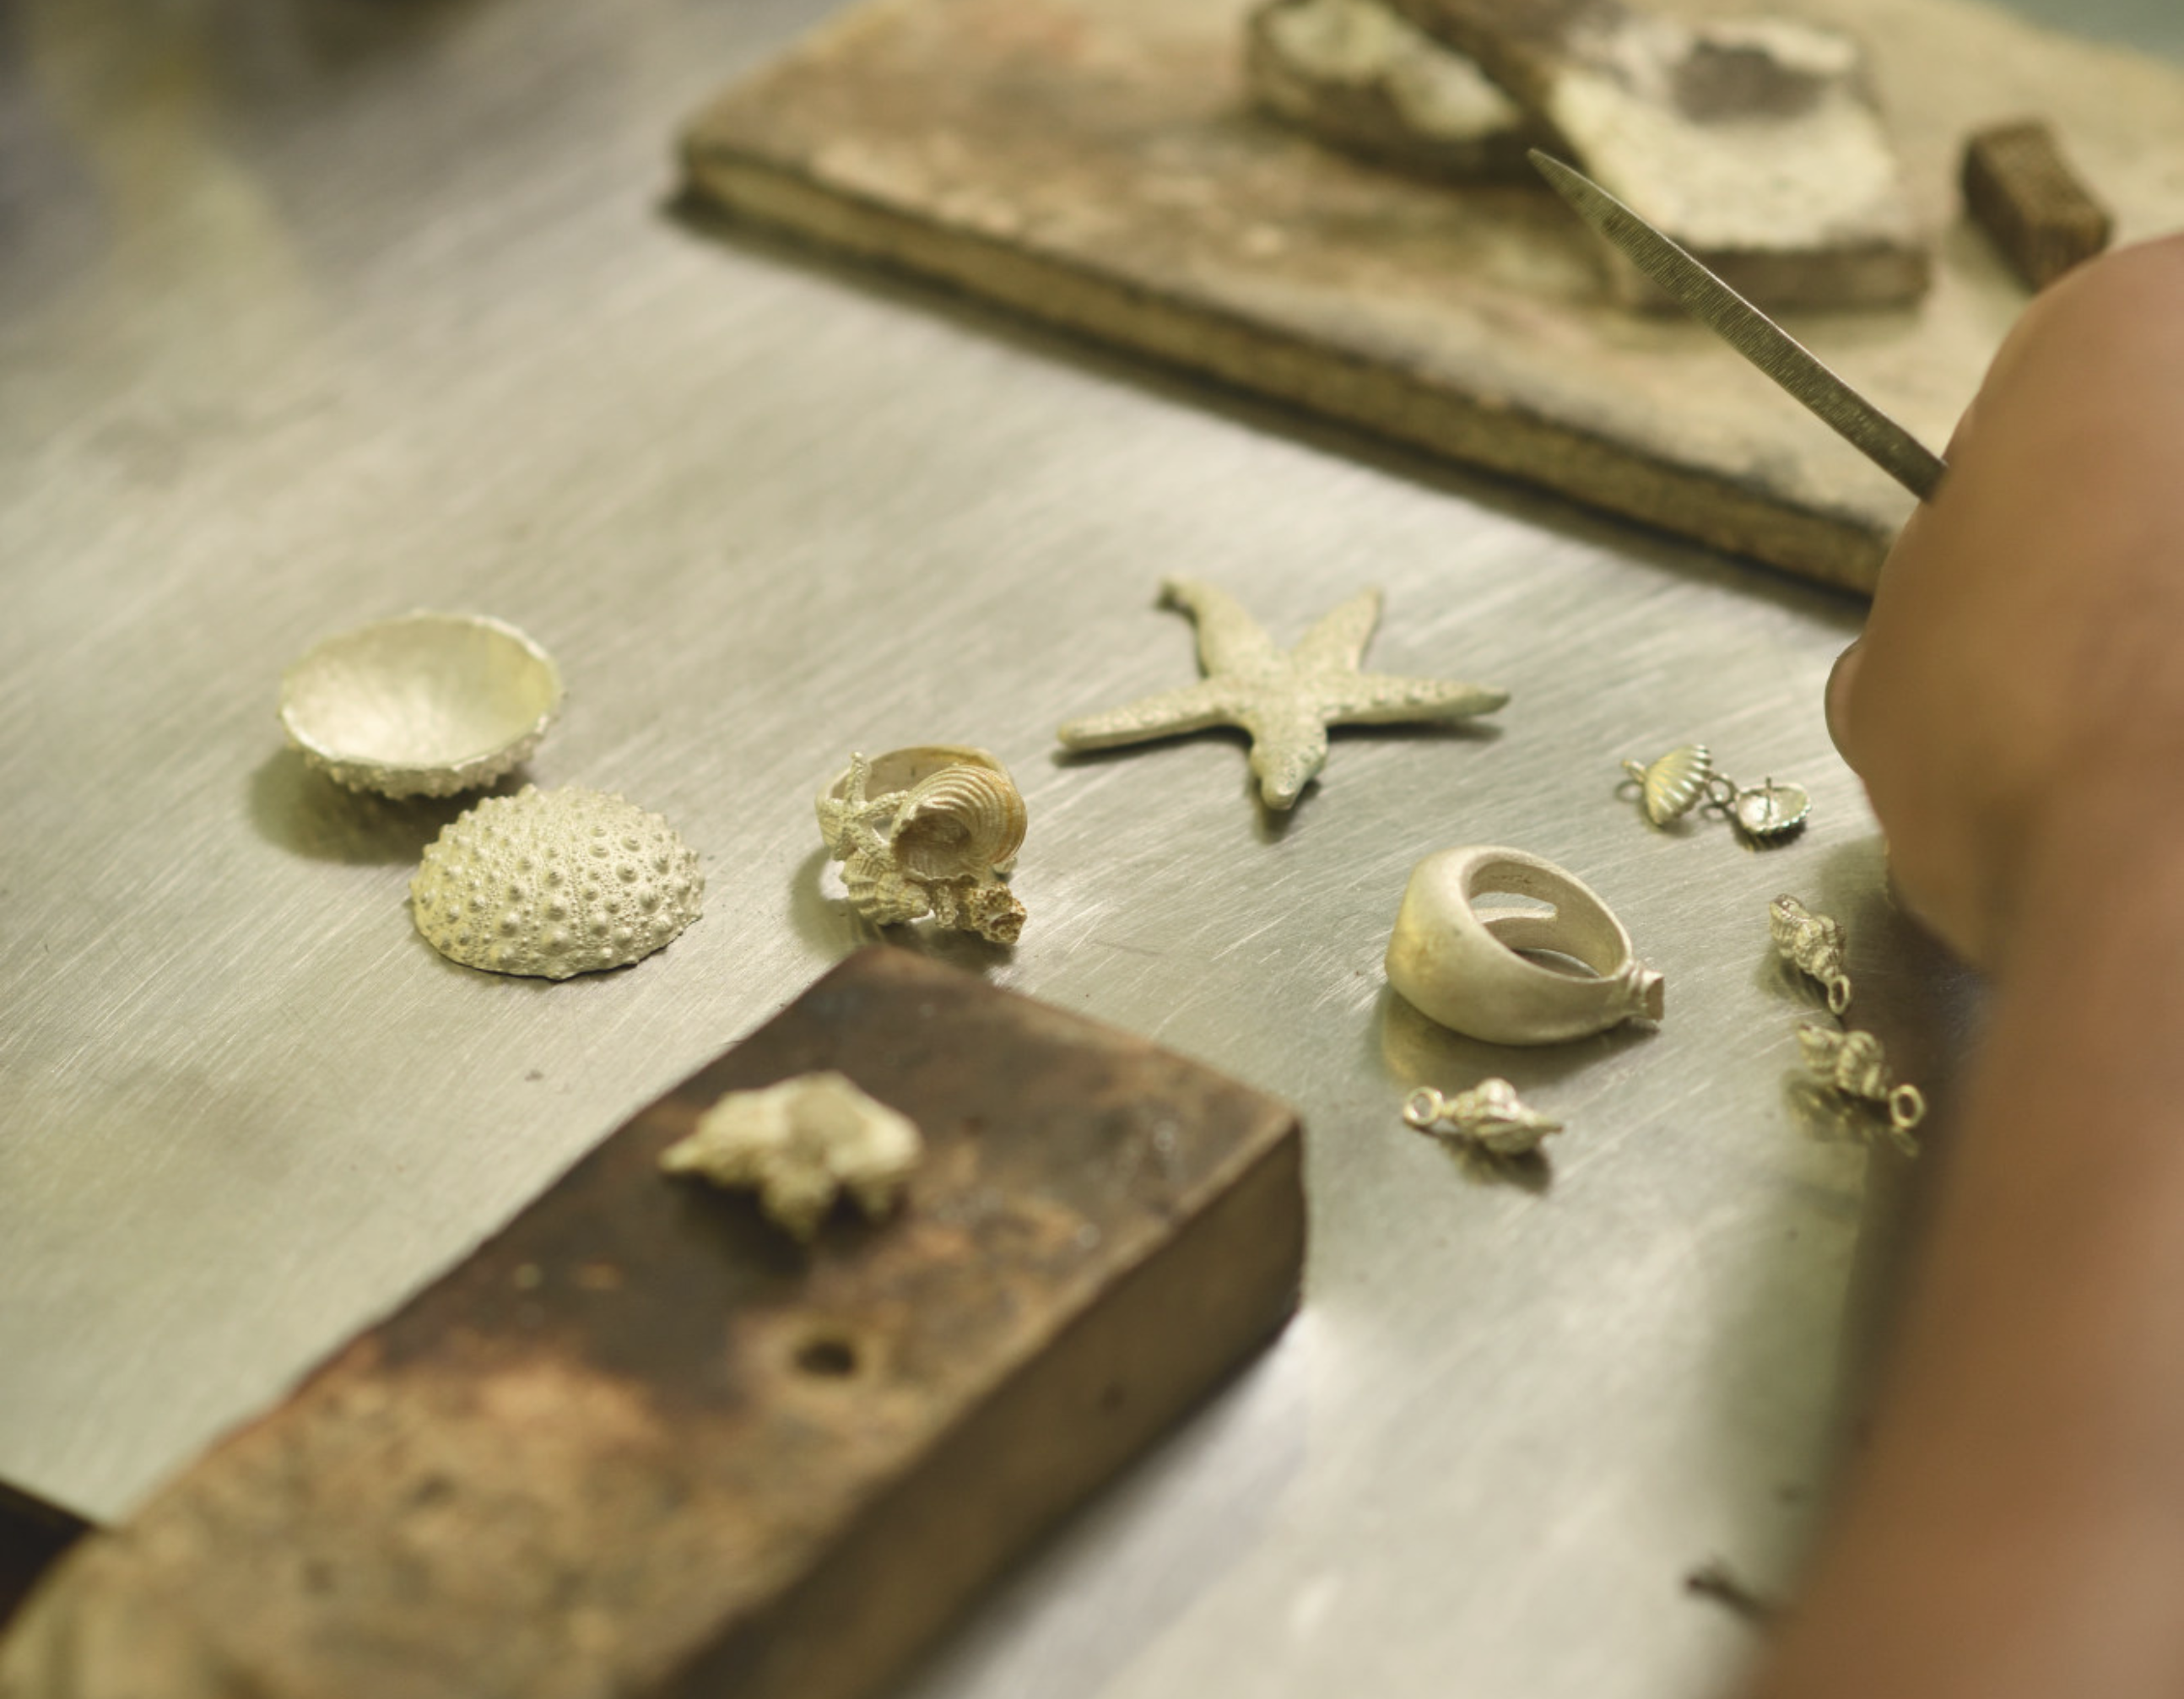 Handmade In Mauritius: Behind The Scenes Of Our Workshop